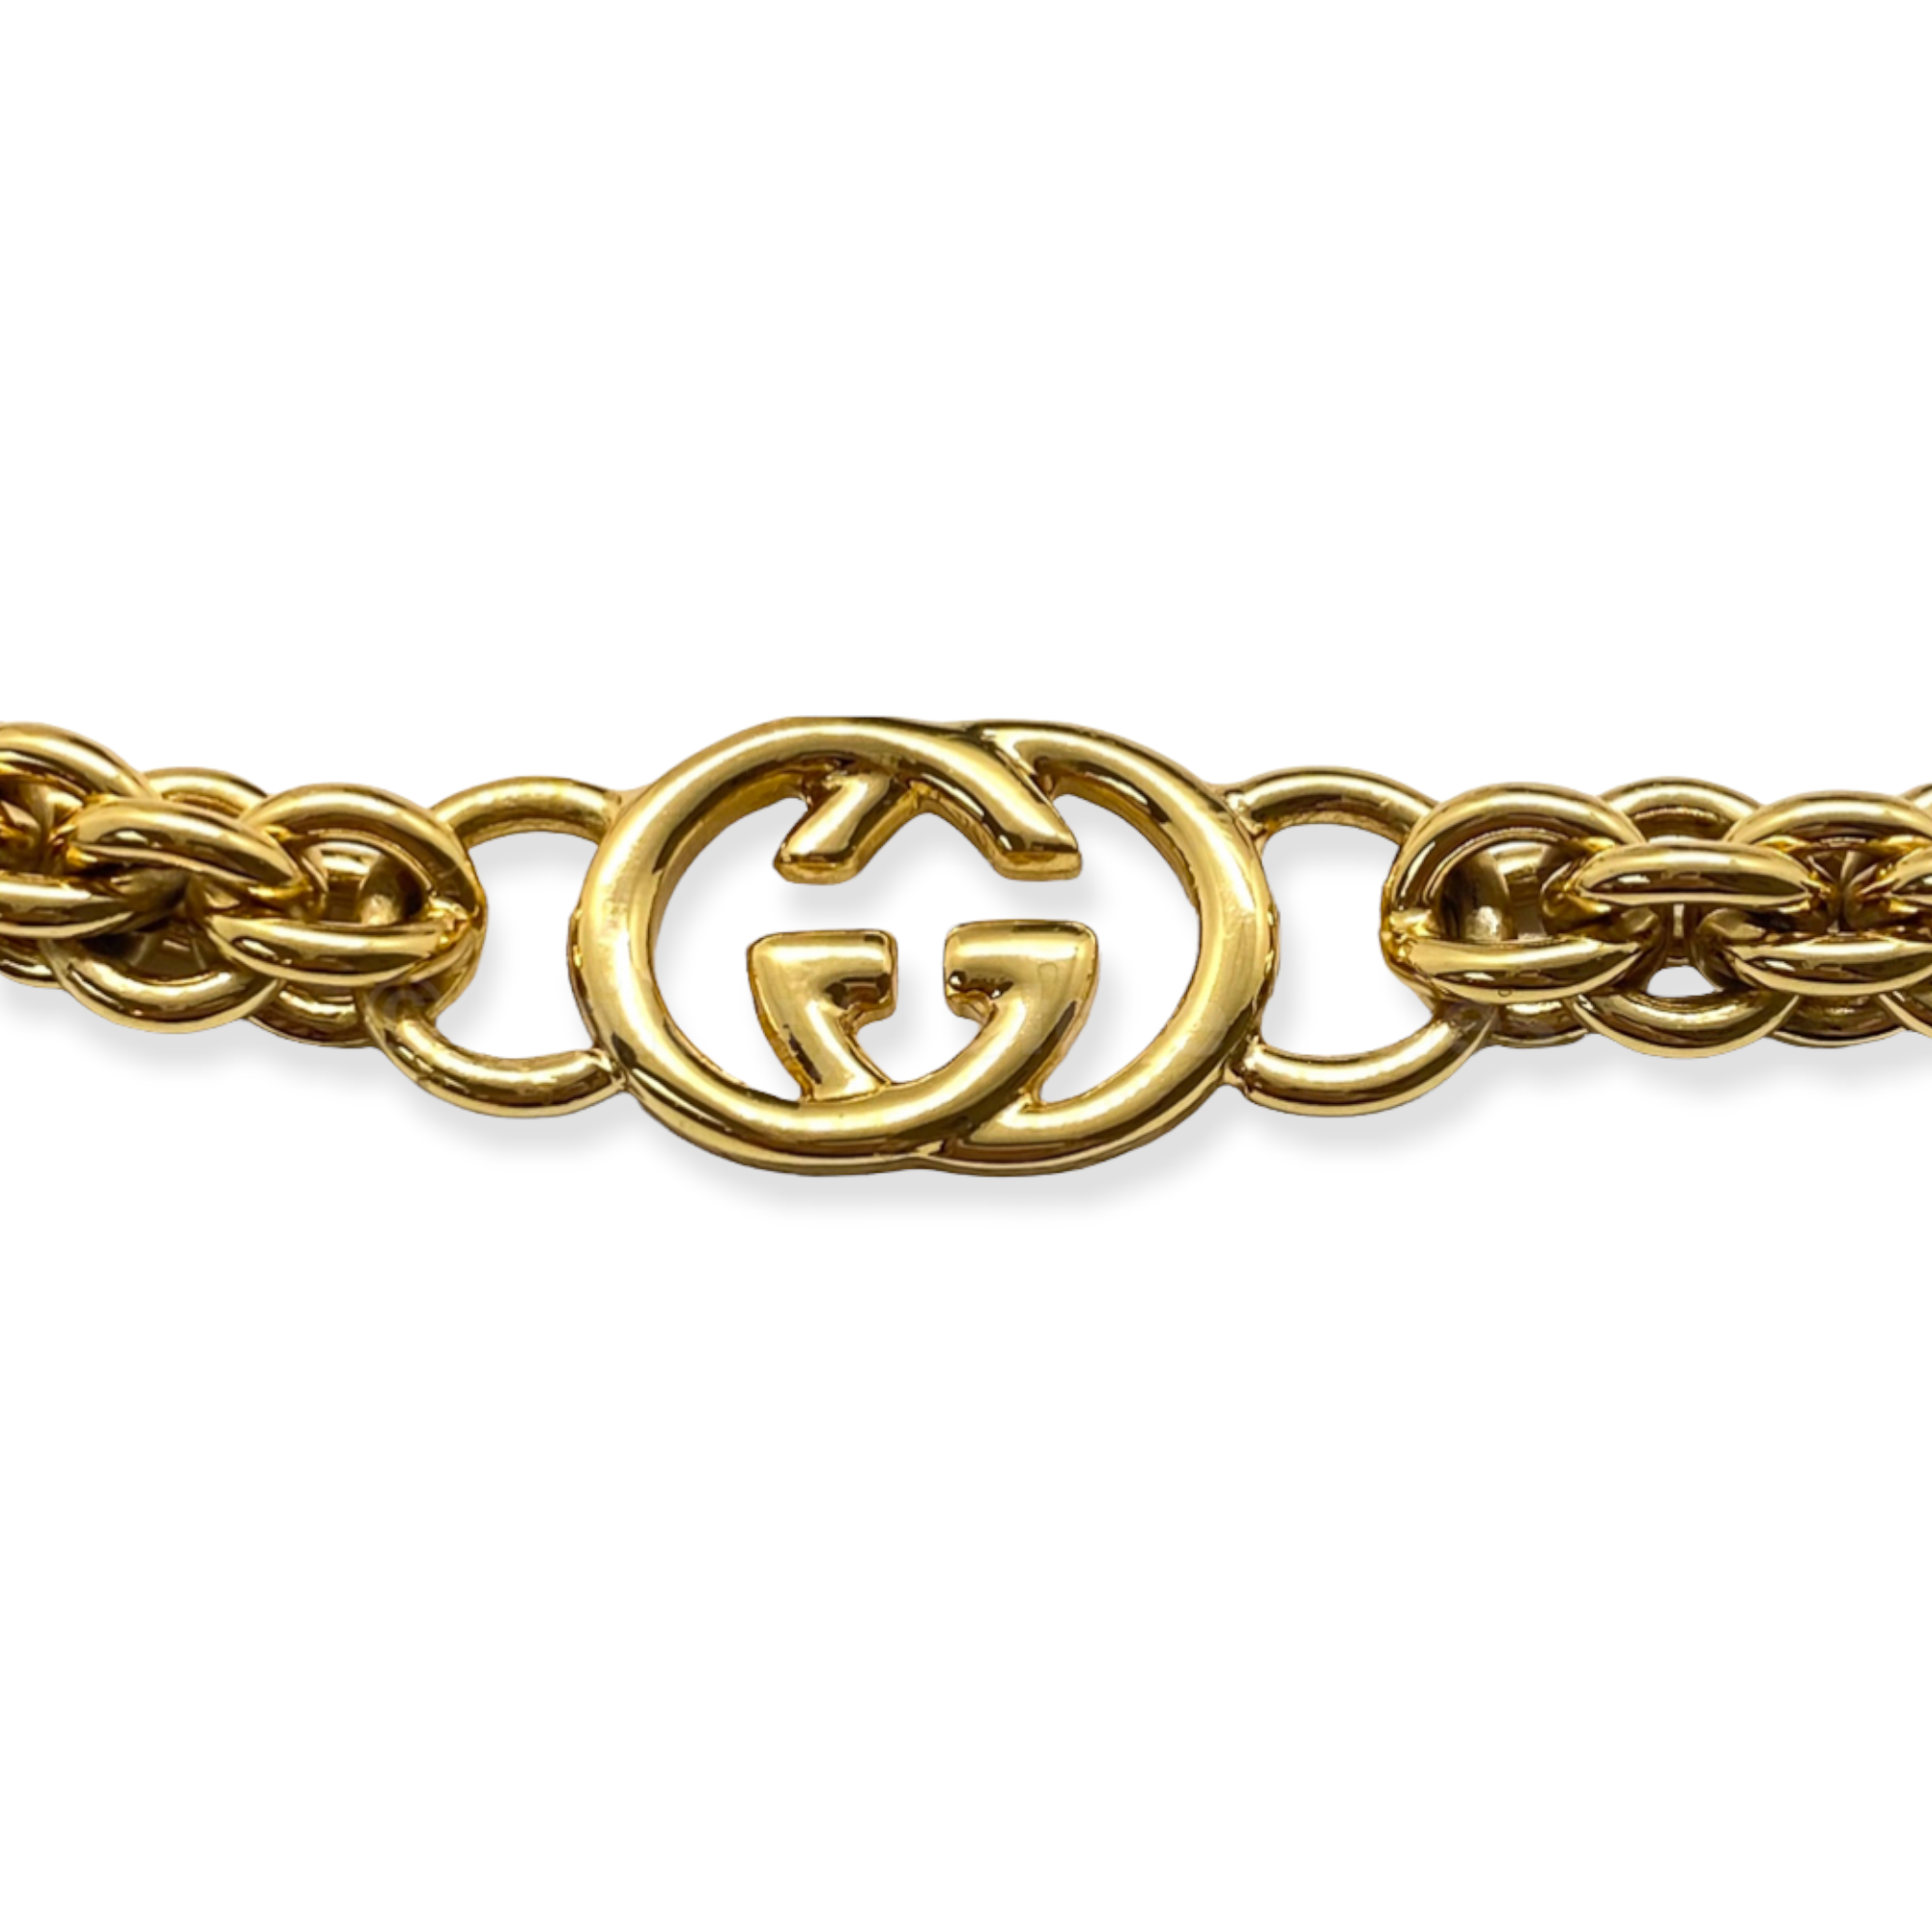 Vintage GUCCI extremely RARE Gold-Tone Metal Chainlink Belt